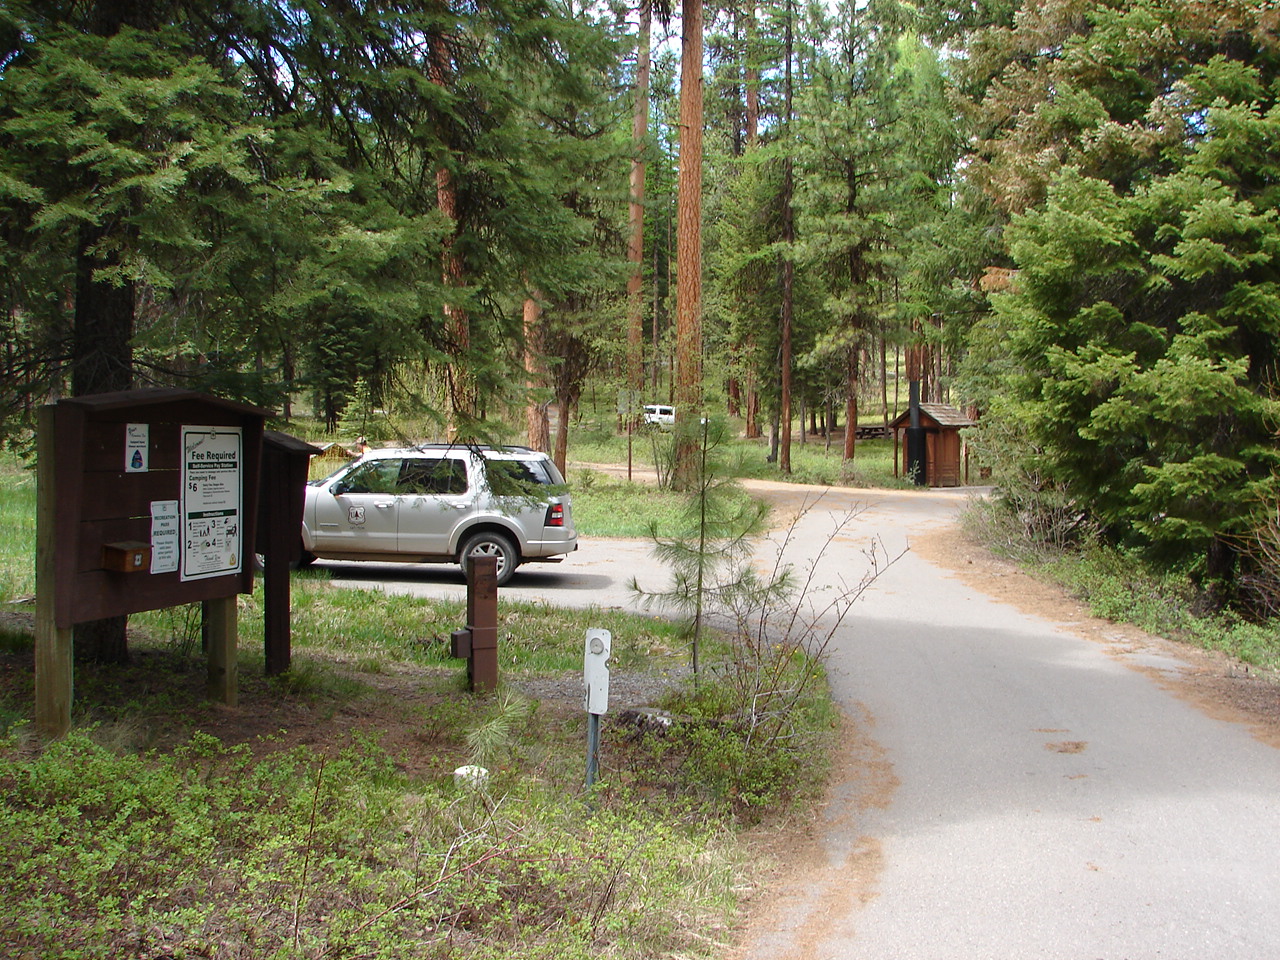 Campground with large ponderosa pine trres and a car parked in a campsite